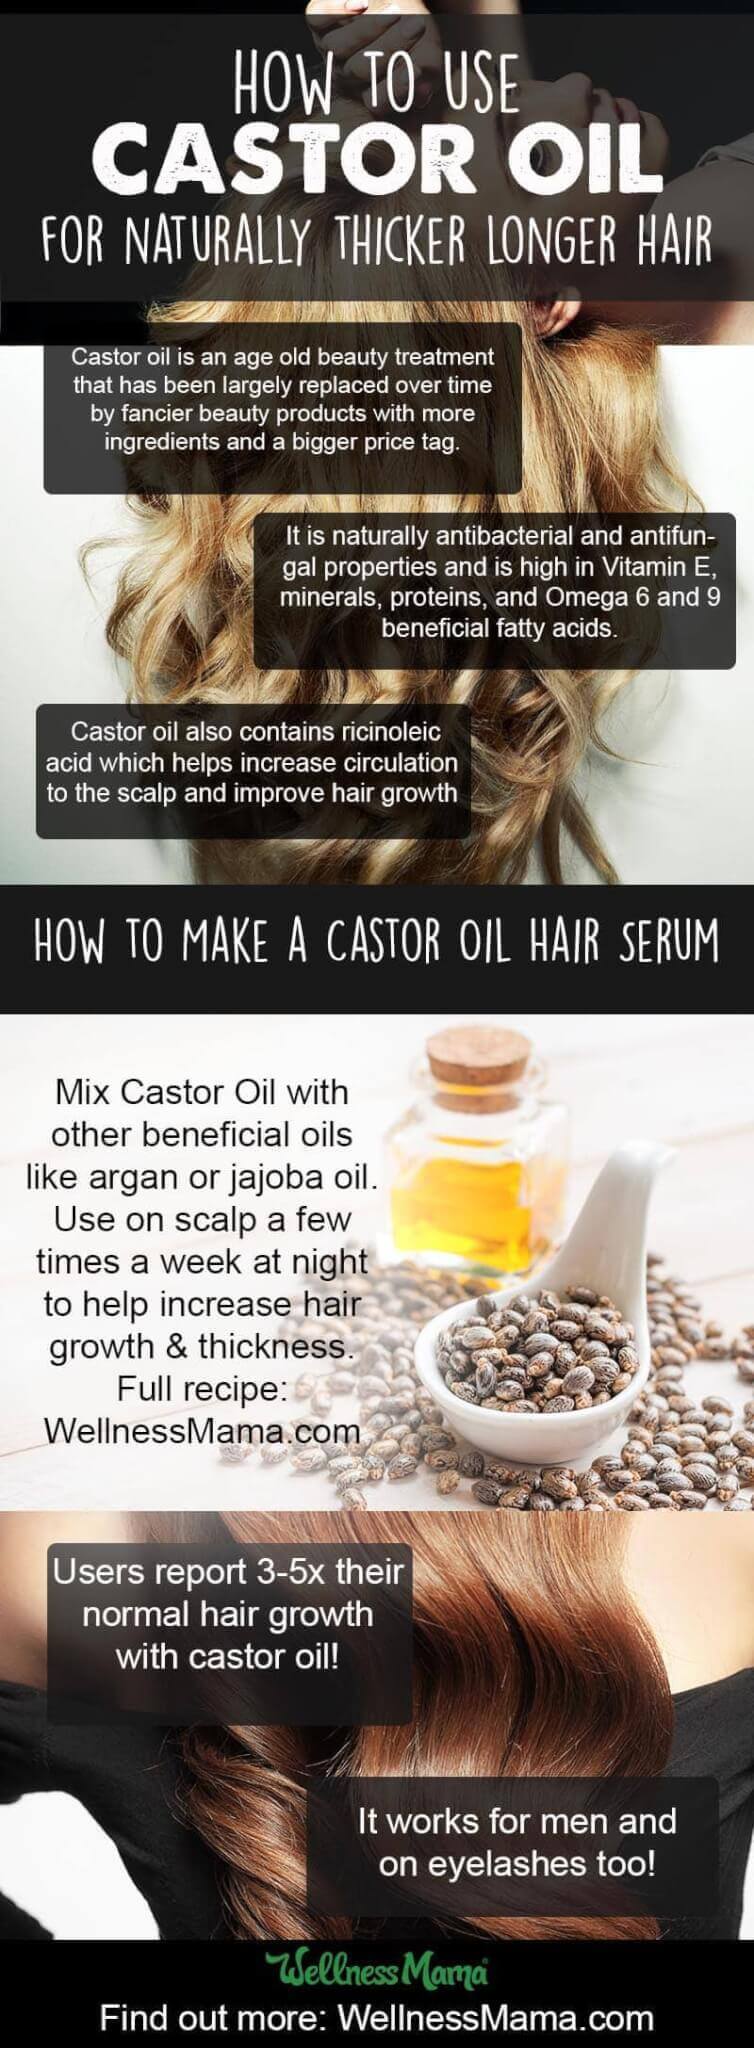 How to use castor oil for naturally thicker longer hair